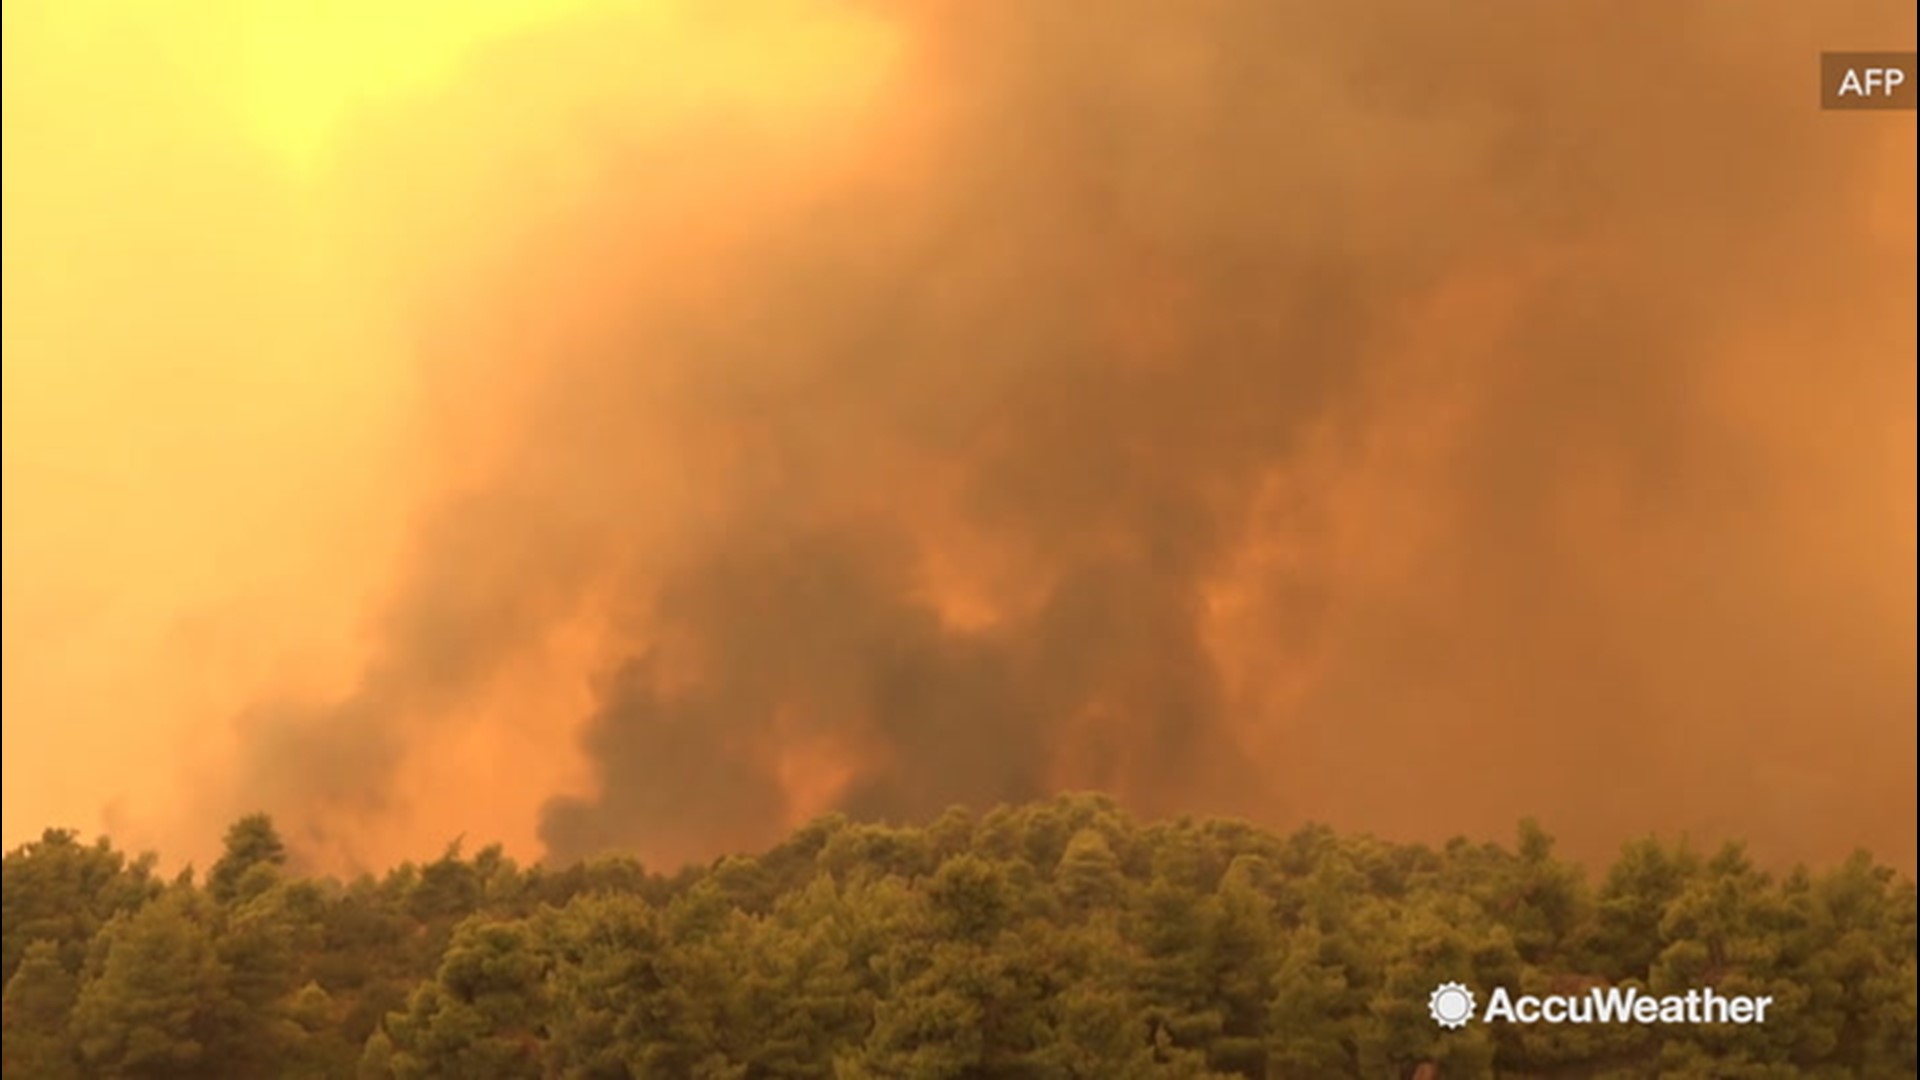 Hundreds of people have evacuated as a wildfire raging on the Greek island of Evia continues to burn. The island's rugged terrain, combined with limited visibility and smoke, are making conditions tough for those battling the blaze. In some spots, the flames reportedly reached as high as 98 feet.